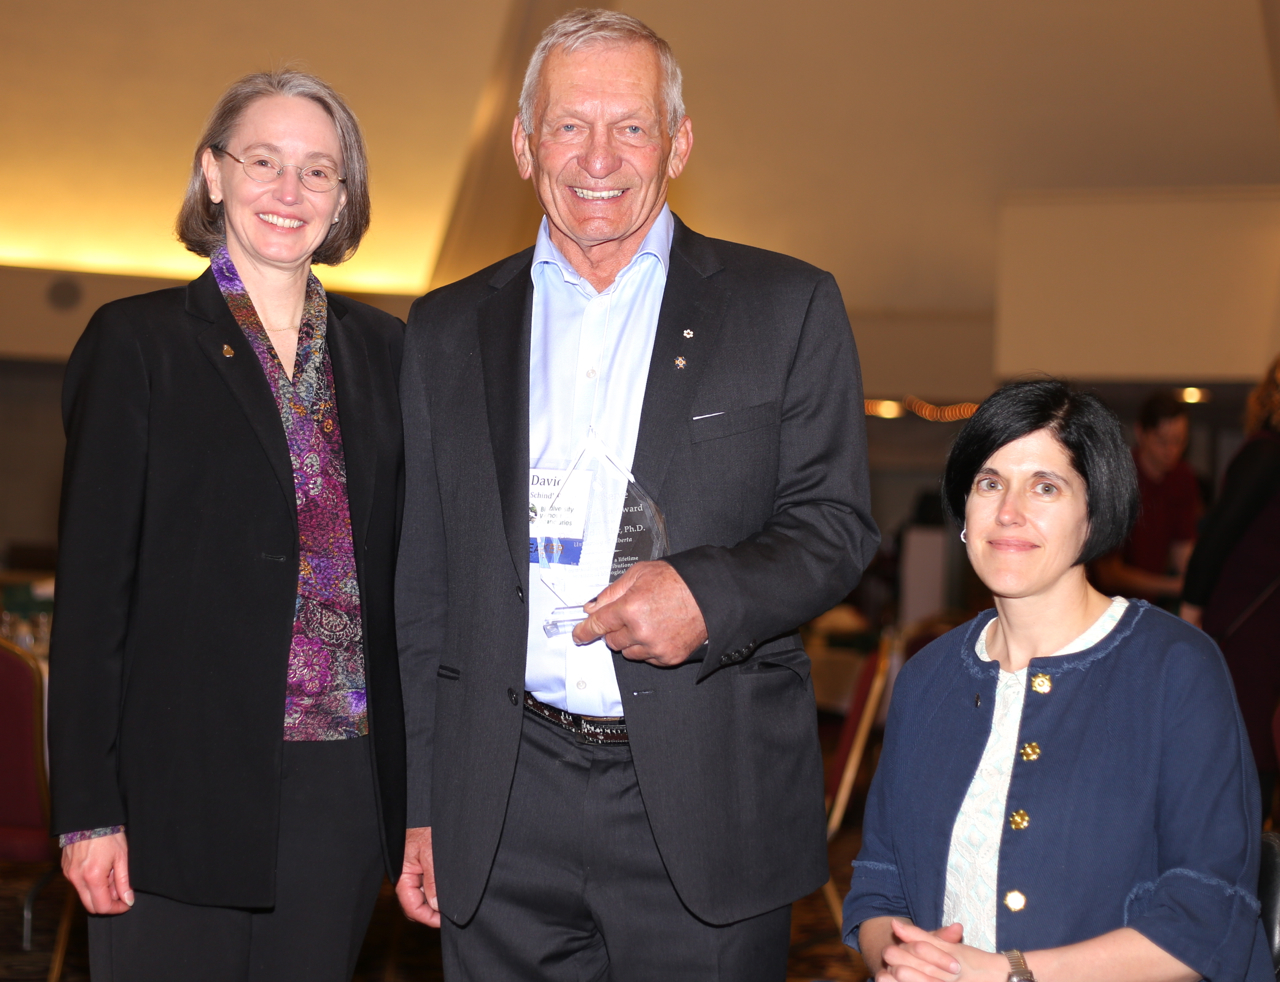 David Schindler receives the 2015 NatureServe Conservation Award from NatureServe President & CEO Mary Klein (left) and board chairwoman Nicole Firlotte (right).